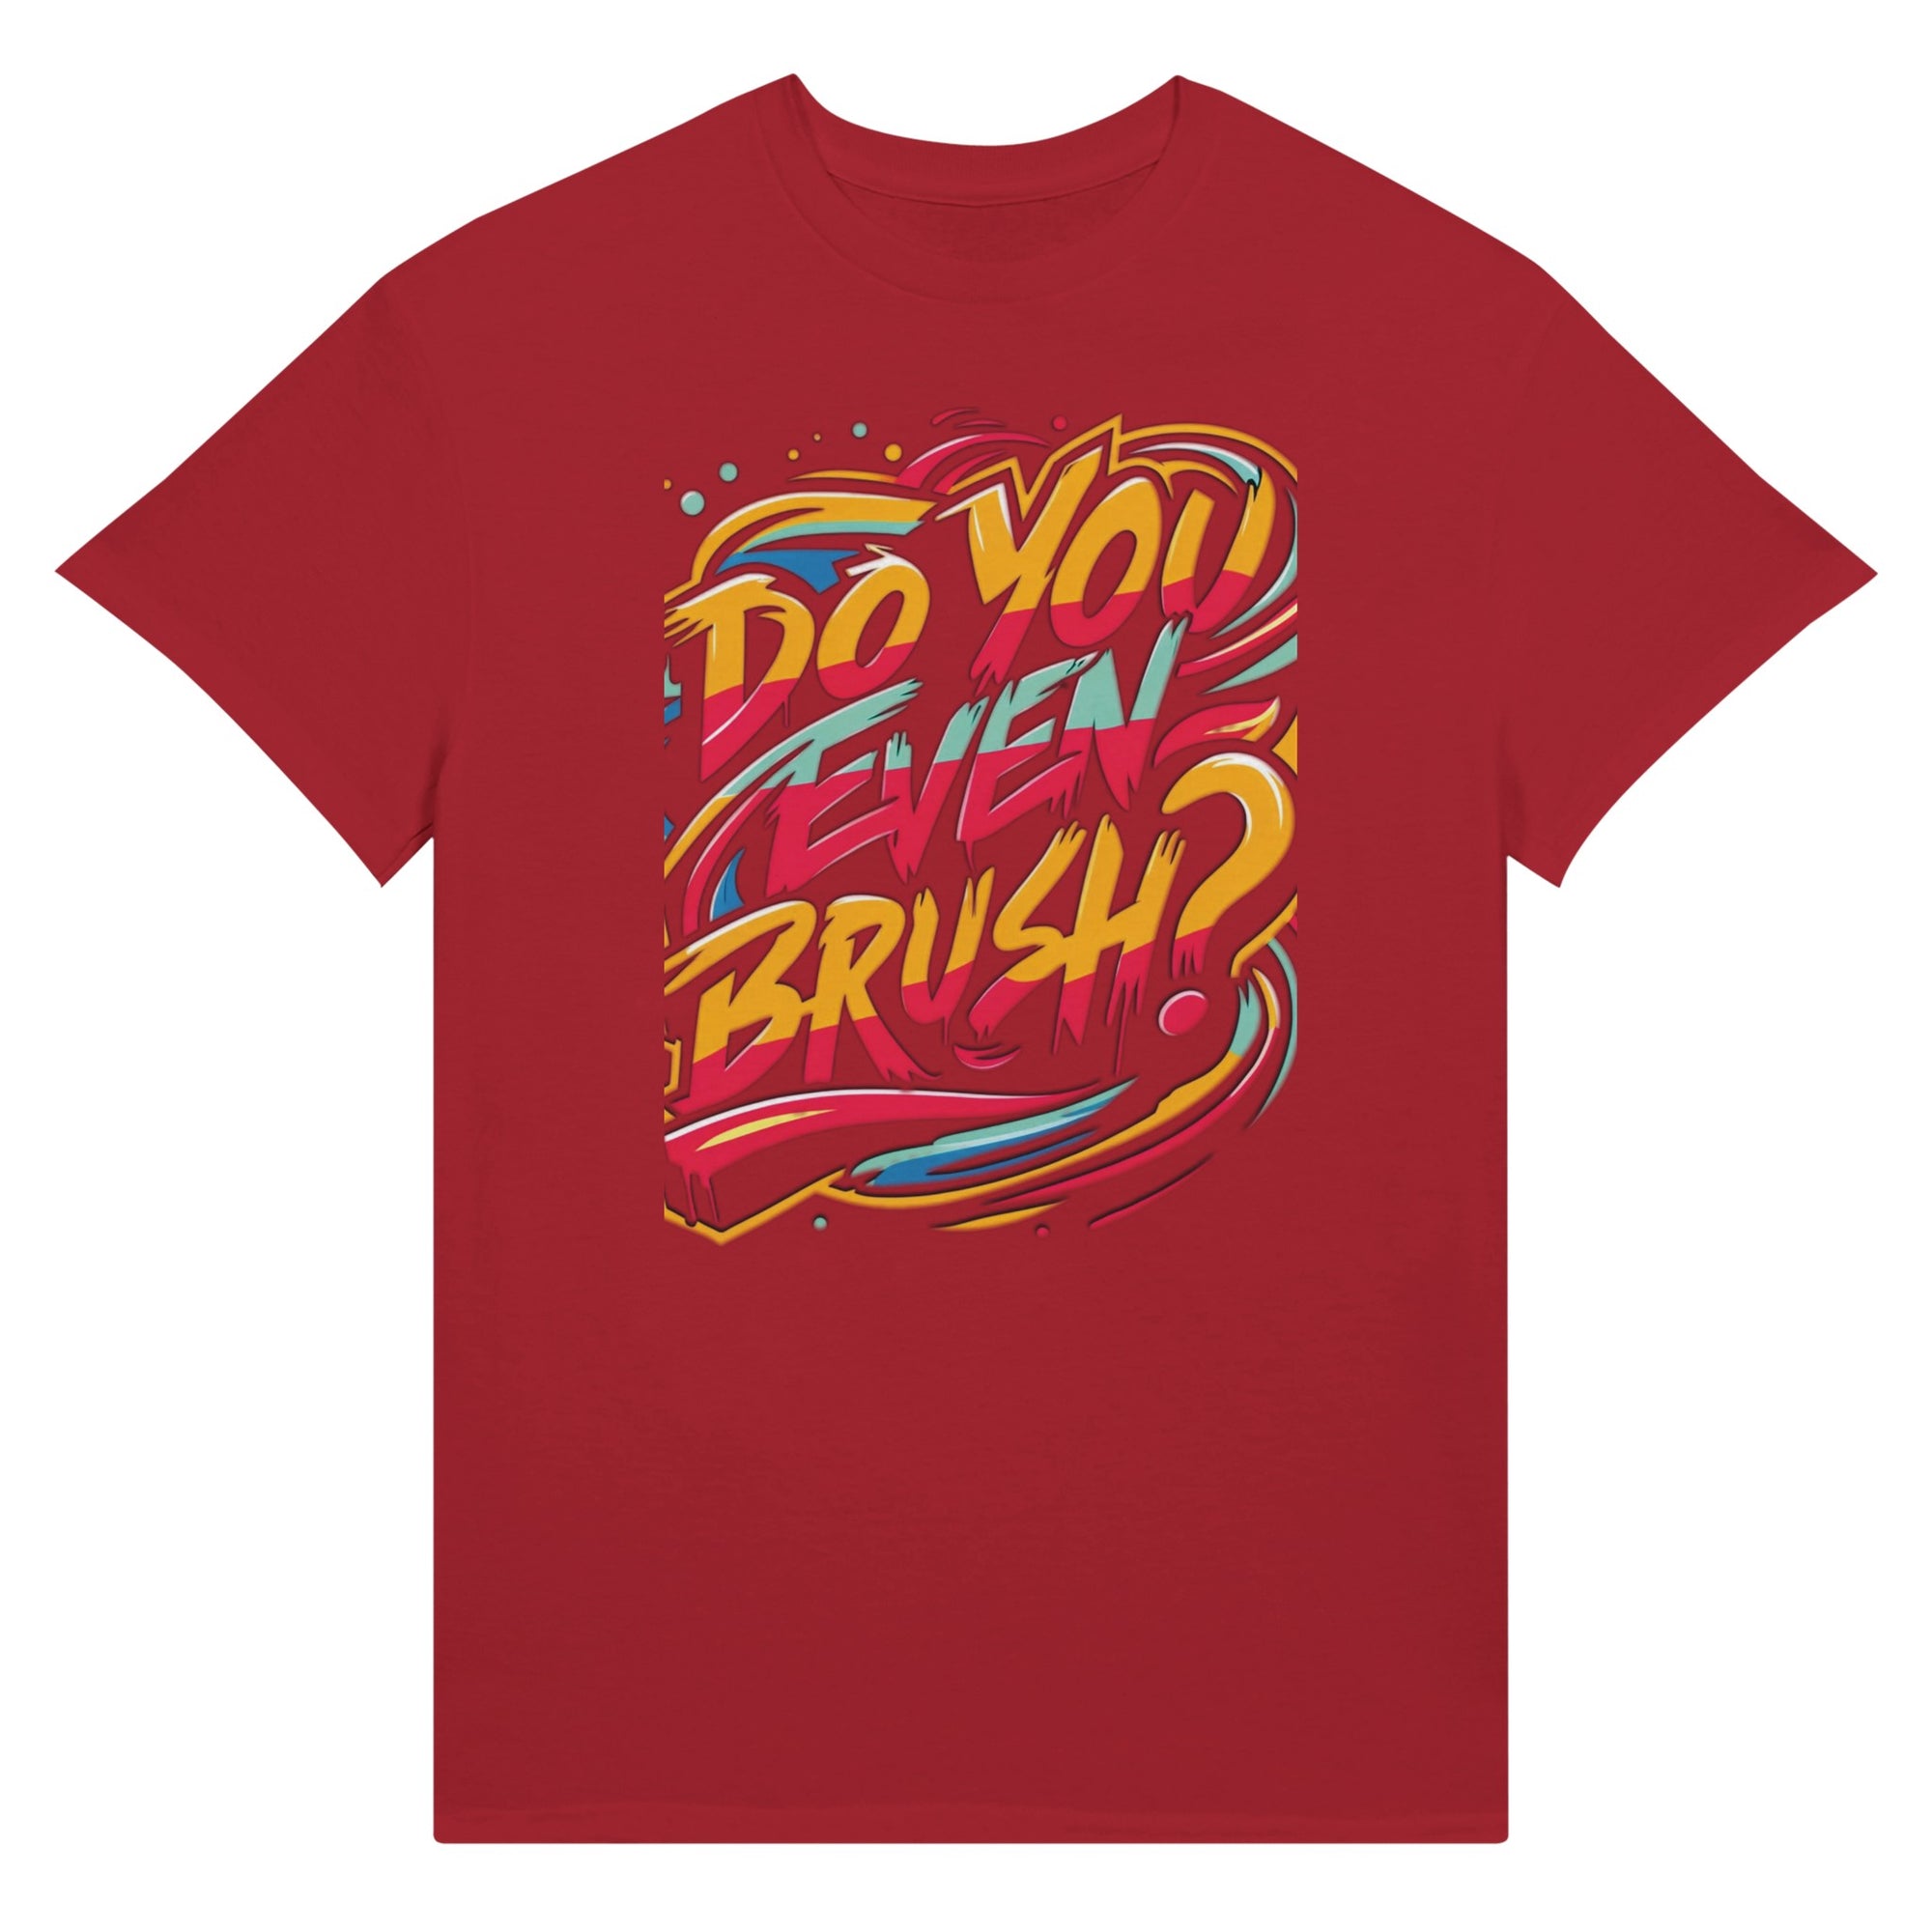 “Do You Even Brush?” T-Shirts - Double R Rags